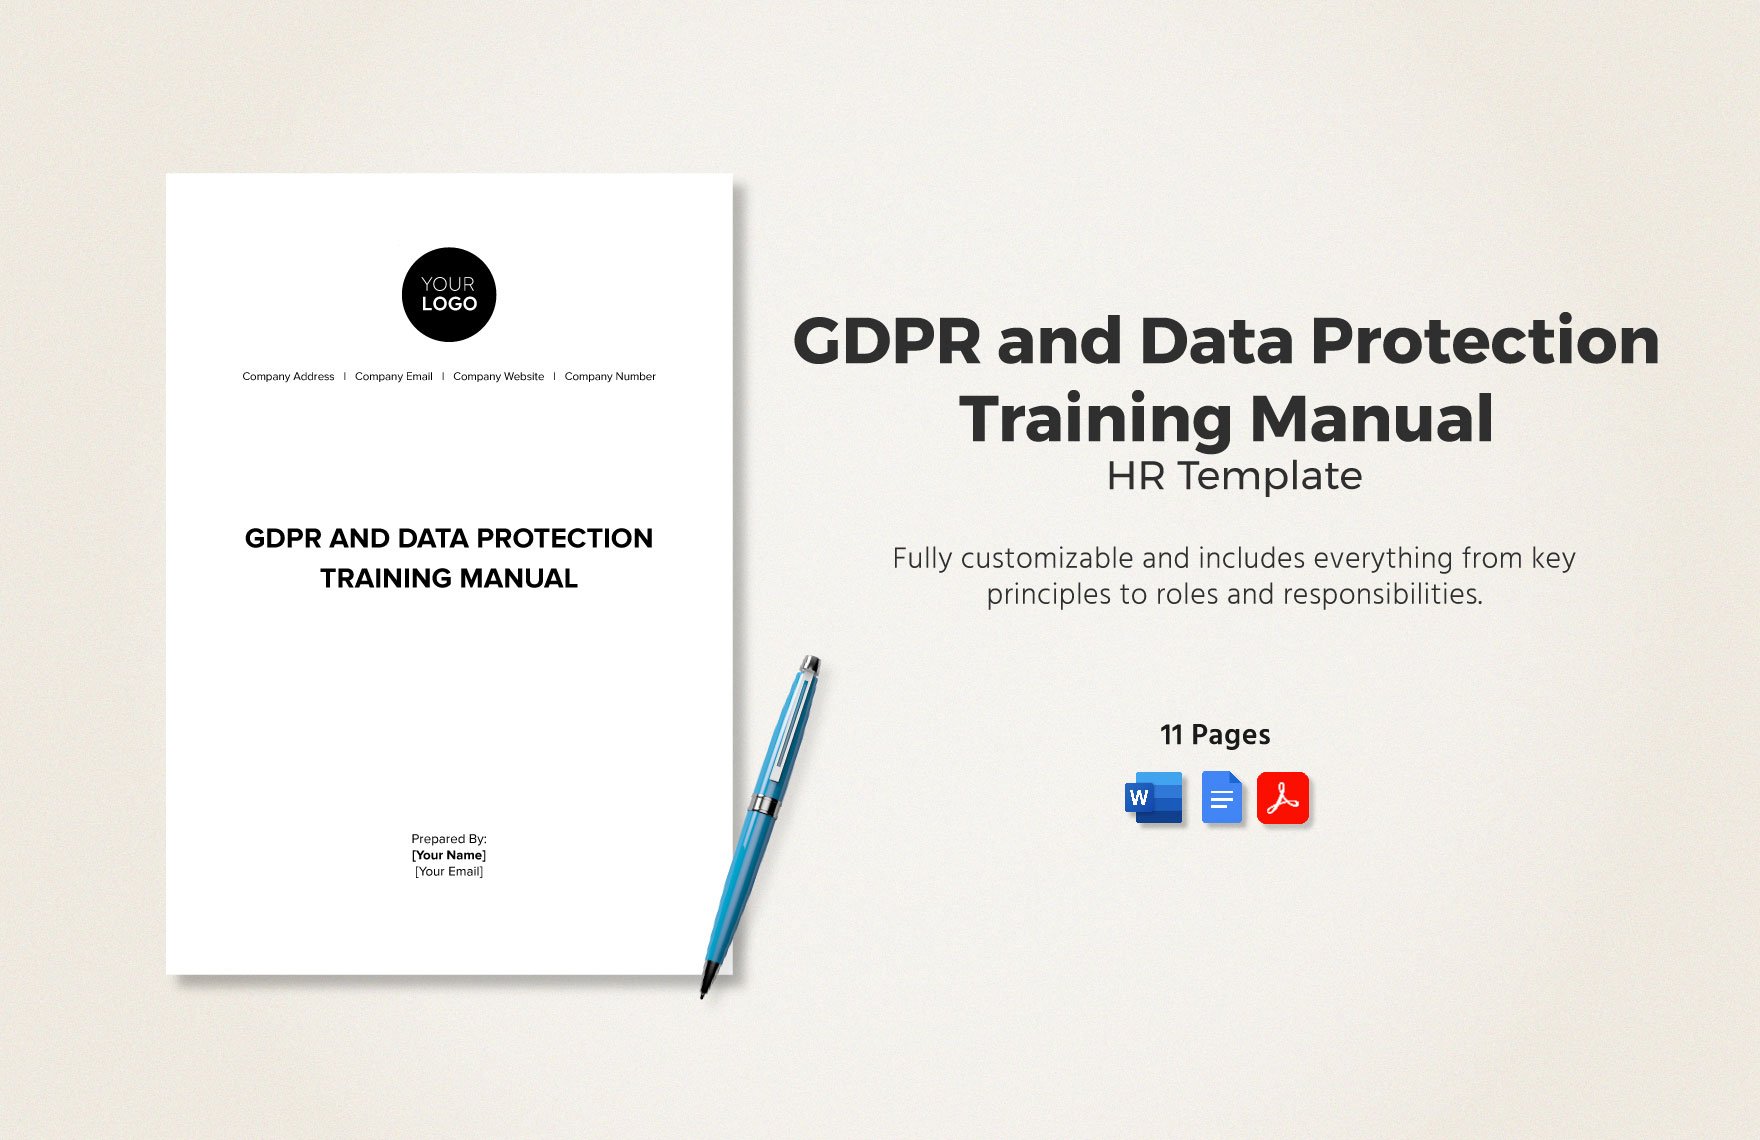 GDPR and Data Protection Training Manual HR Template